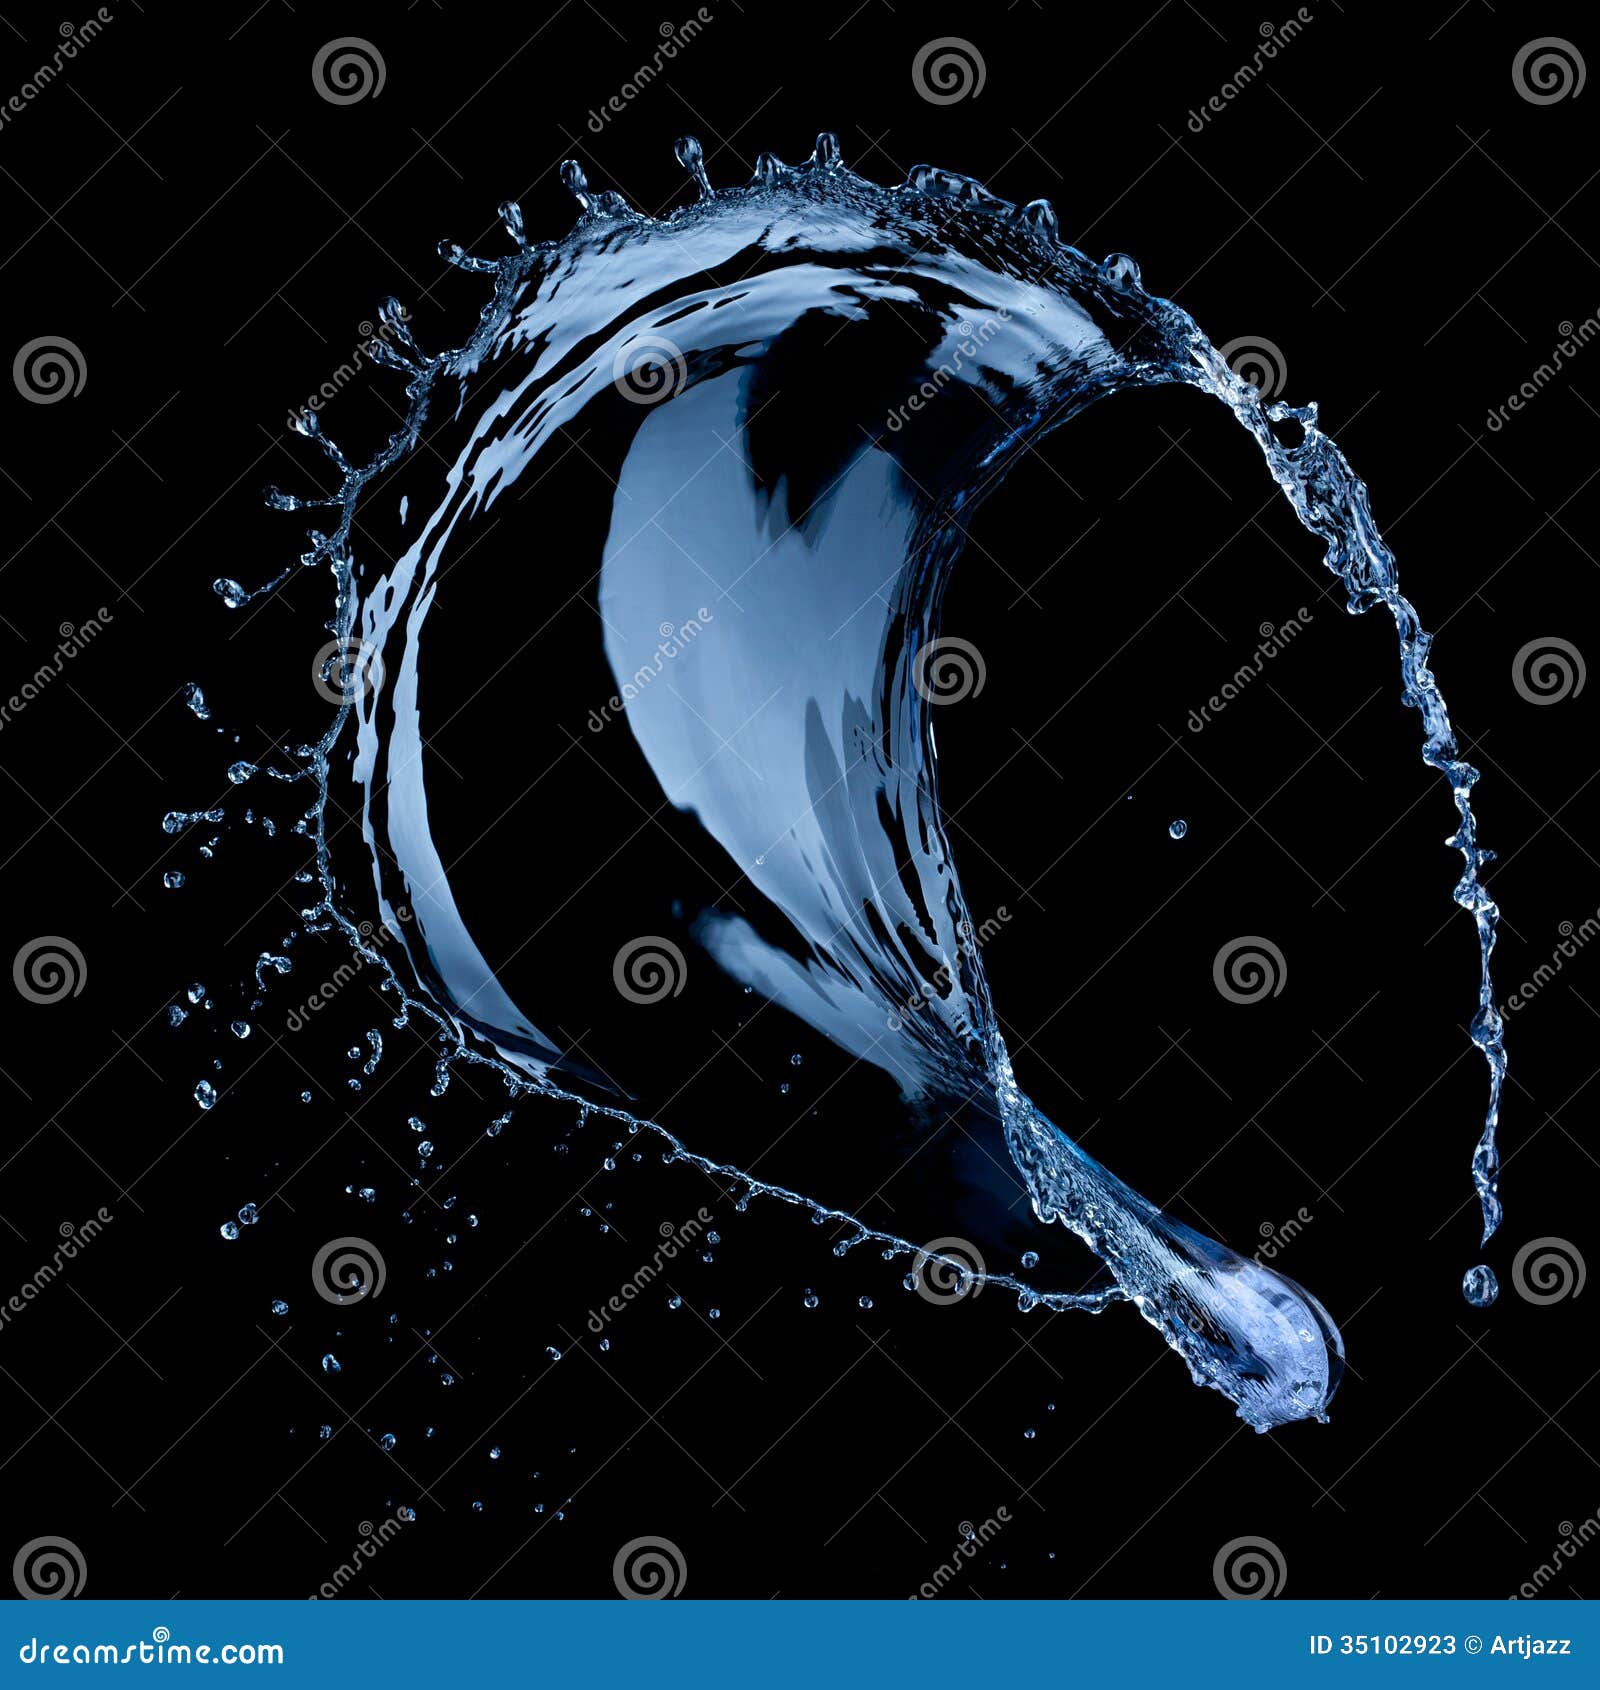 Water Splash Isolated On Black Stock Image - Image of clear, black